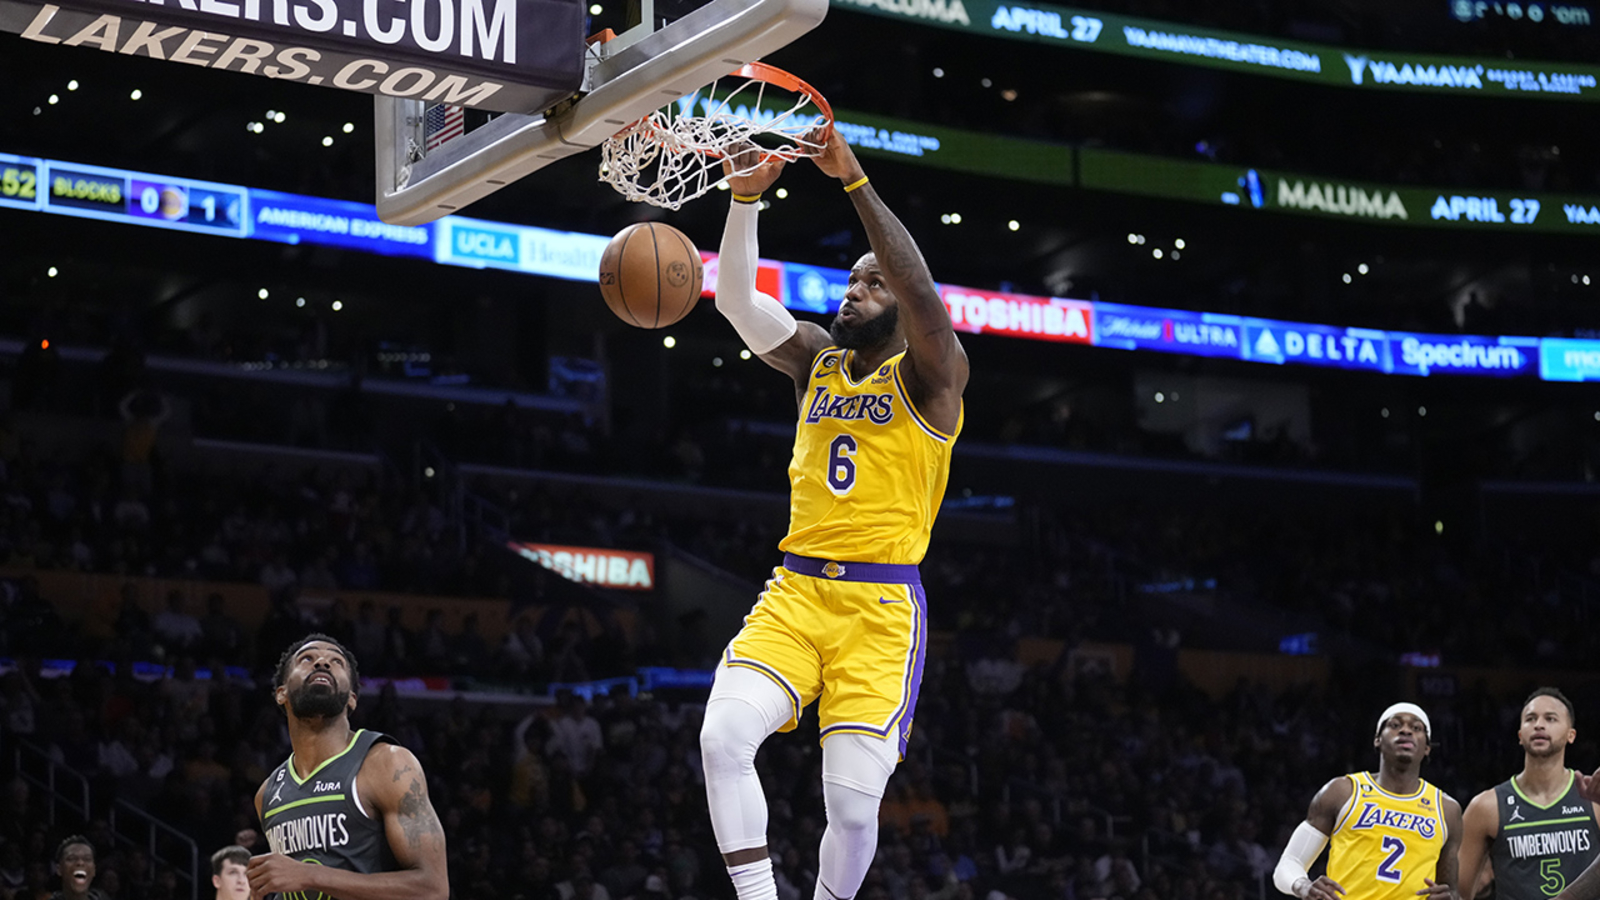 HustleTV Lakers Advance to NBA Playoffs After Last Night's Win